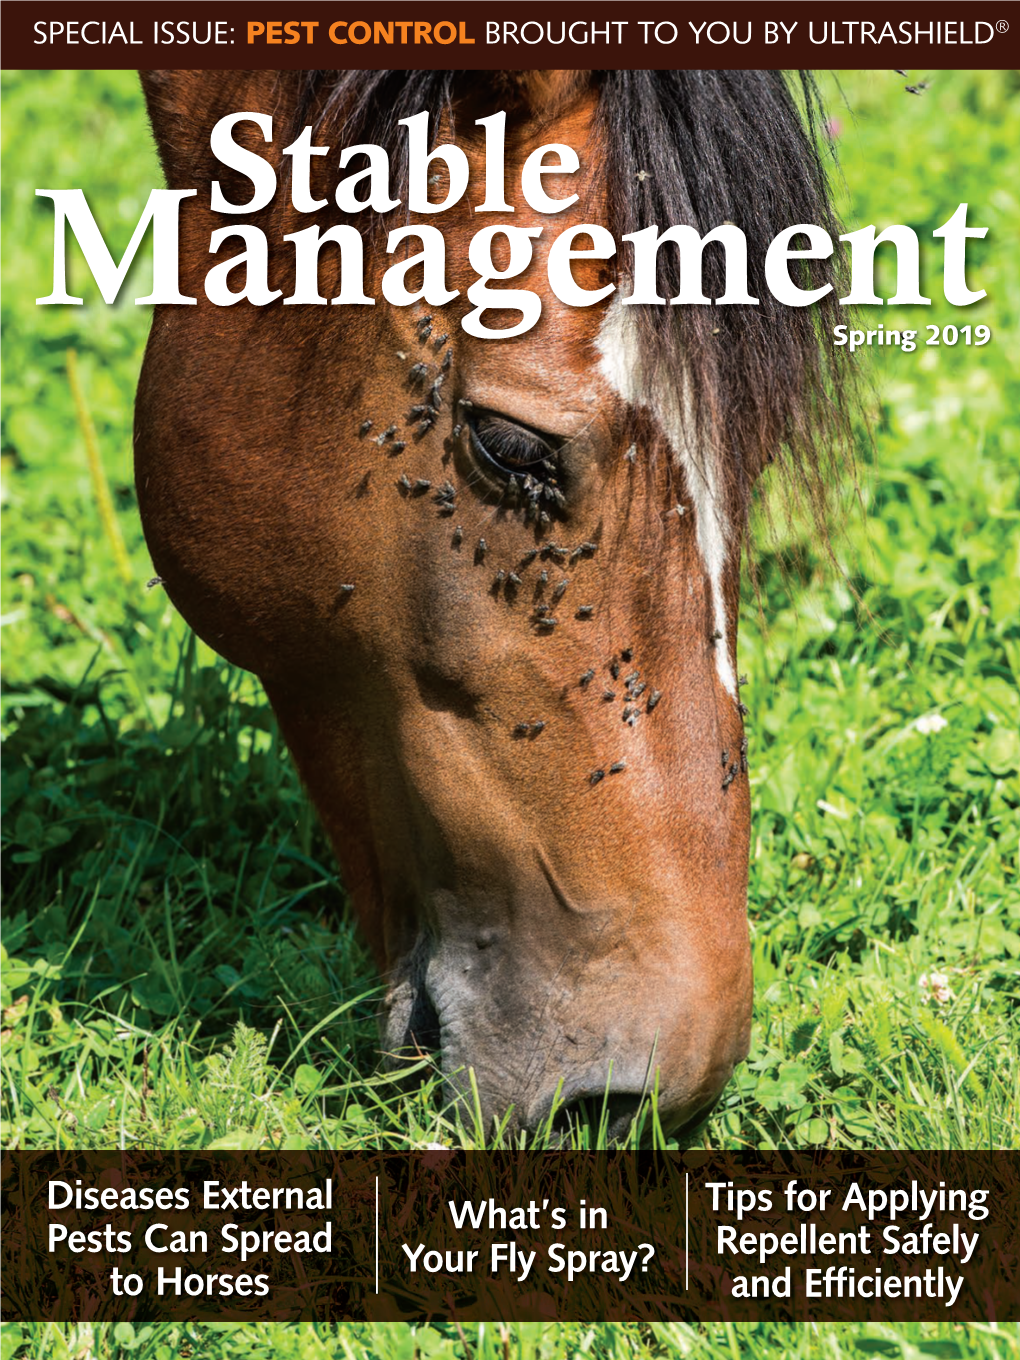 Diseases External Pests Can Spread to Horses What's in Your Fly Spray